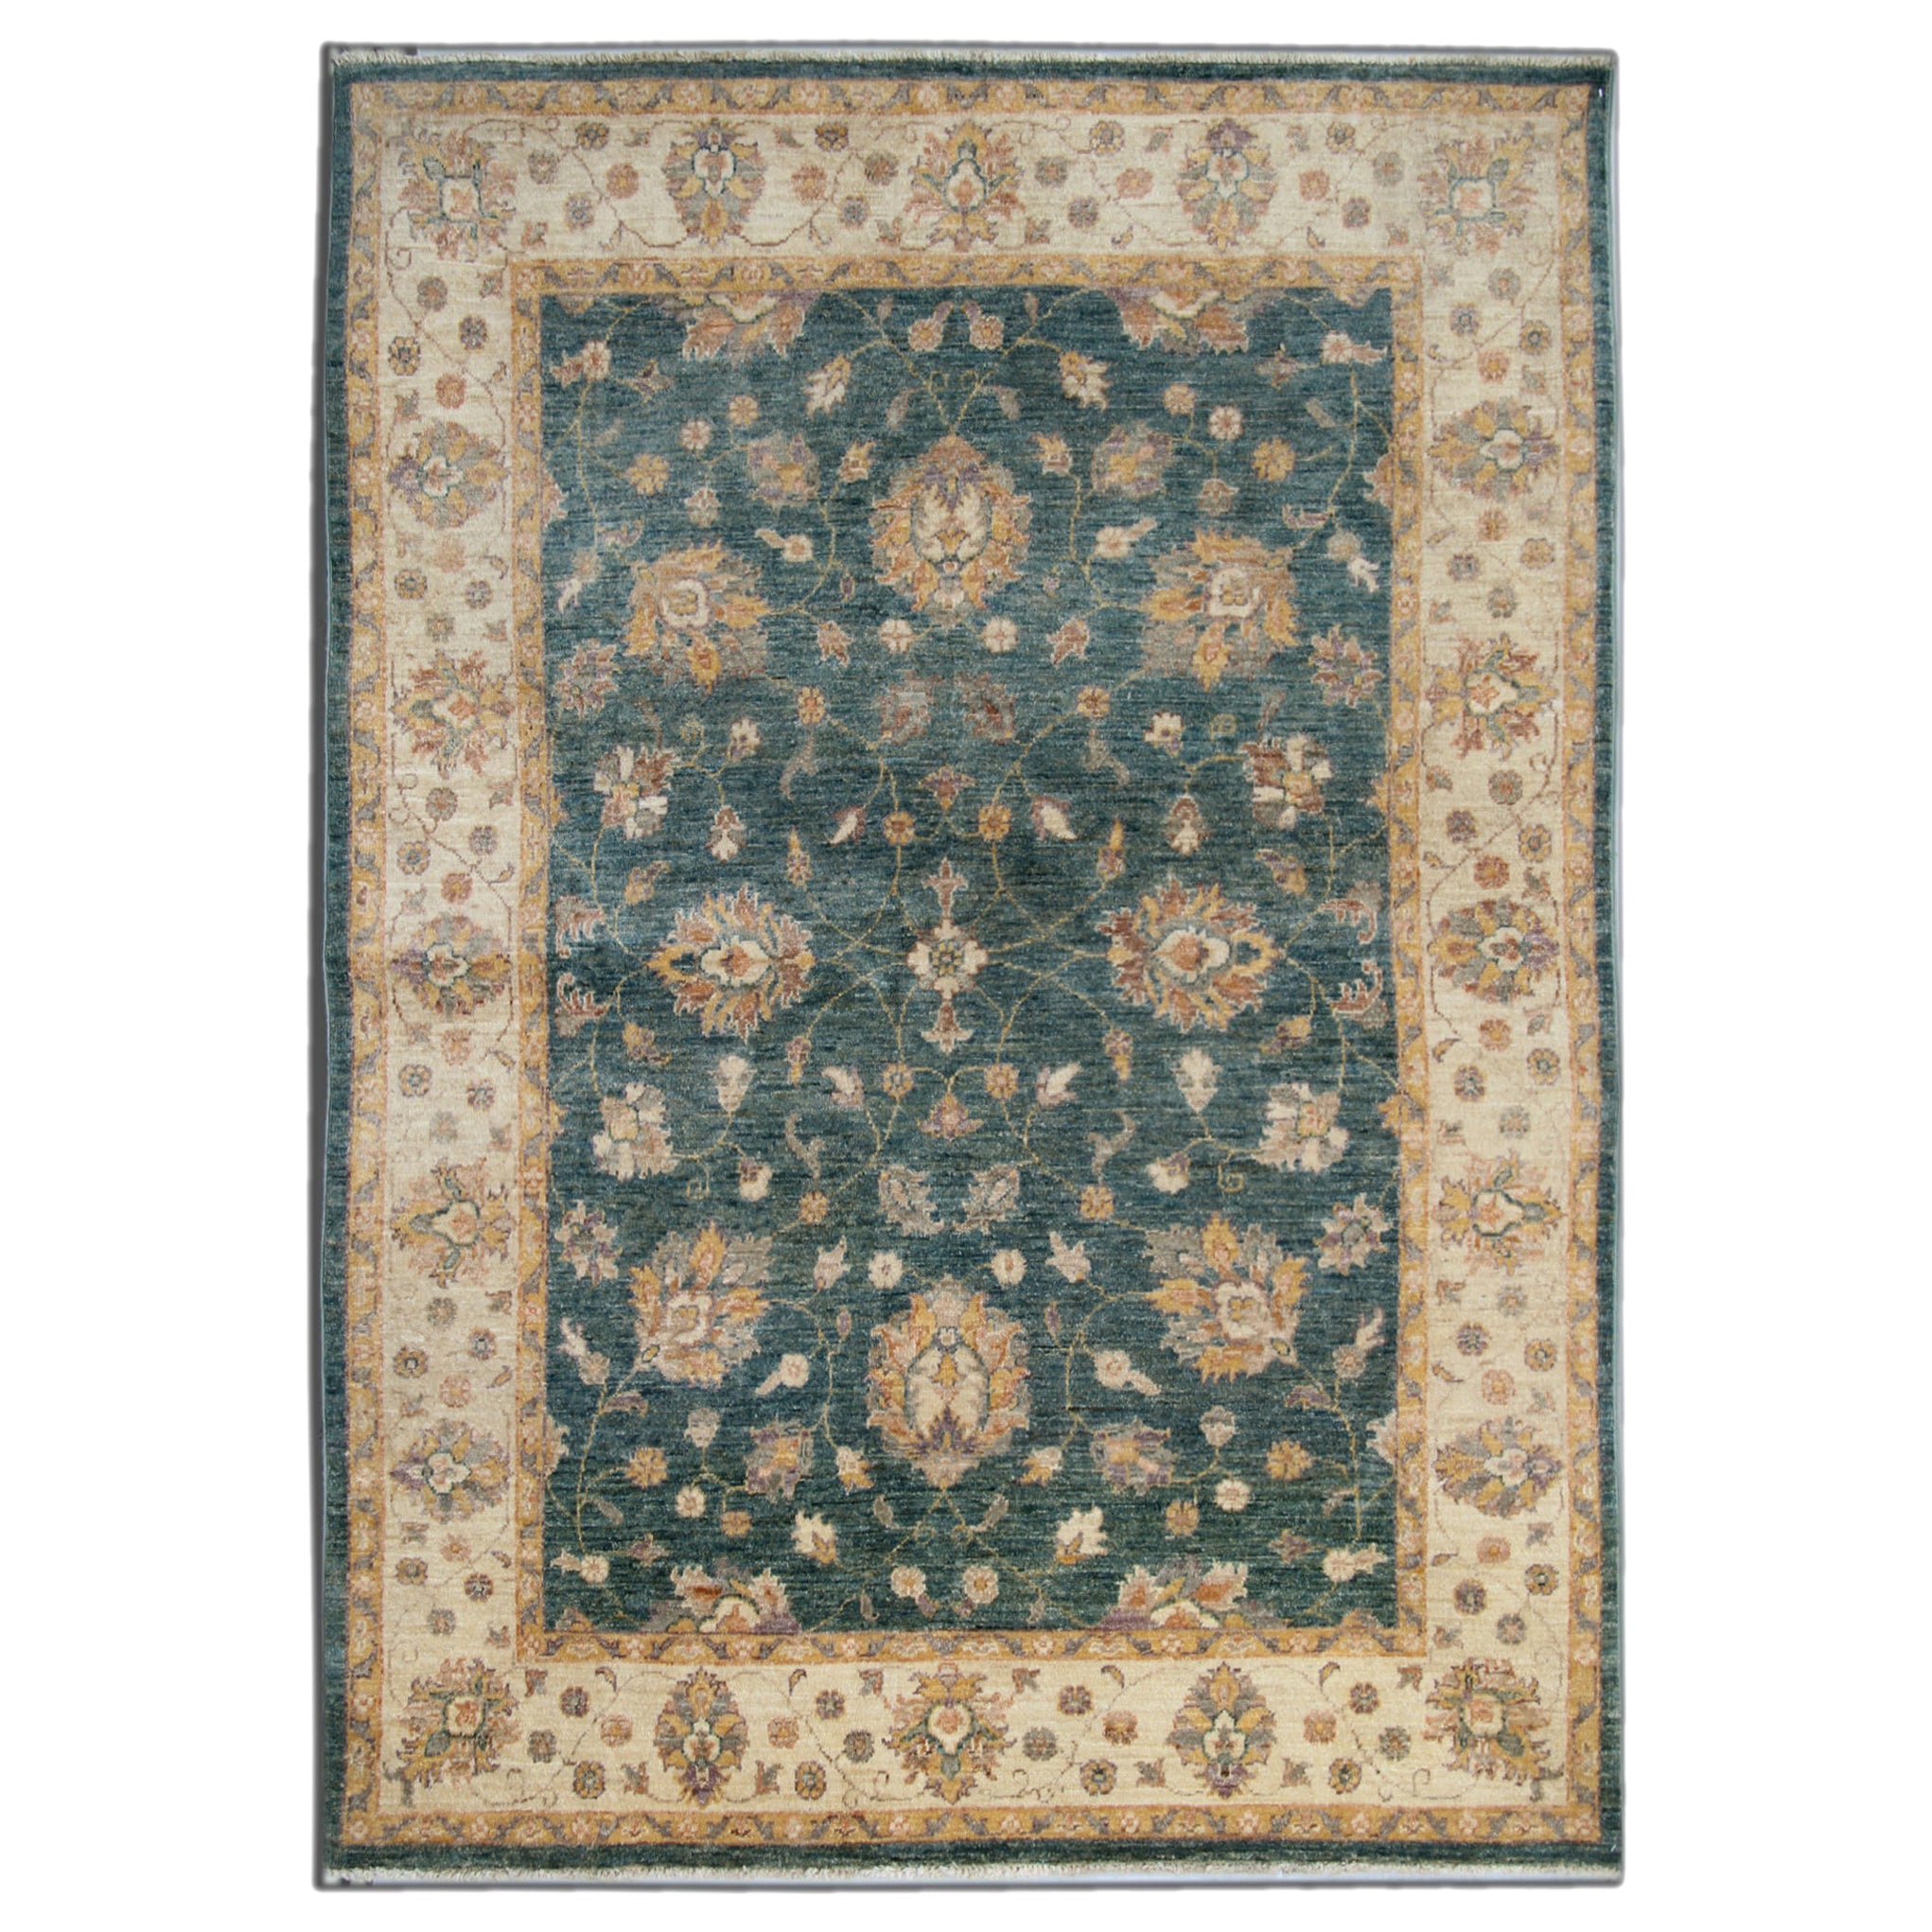 Wool Carpet Traditional Rug Floral Green Cream Wool Area Rug All Over